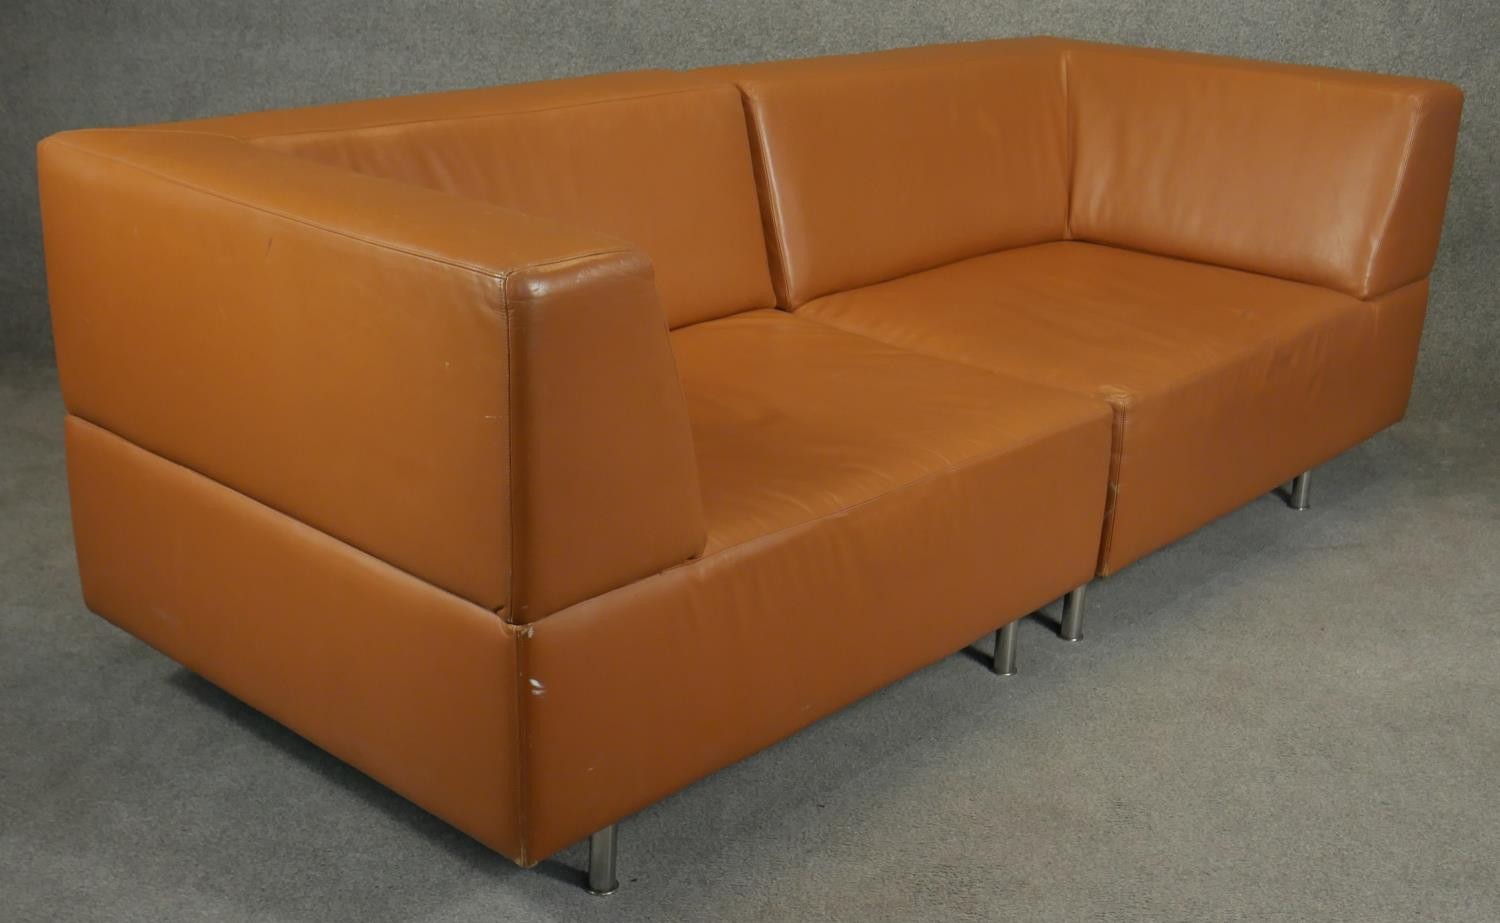 A contemporary Hay 'Mags' two section modular sofa upholstered in light tan leather. H.78 L.220 D. - Image 2 of 4